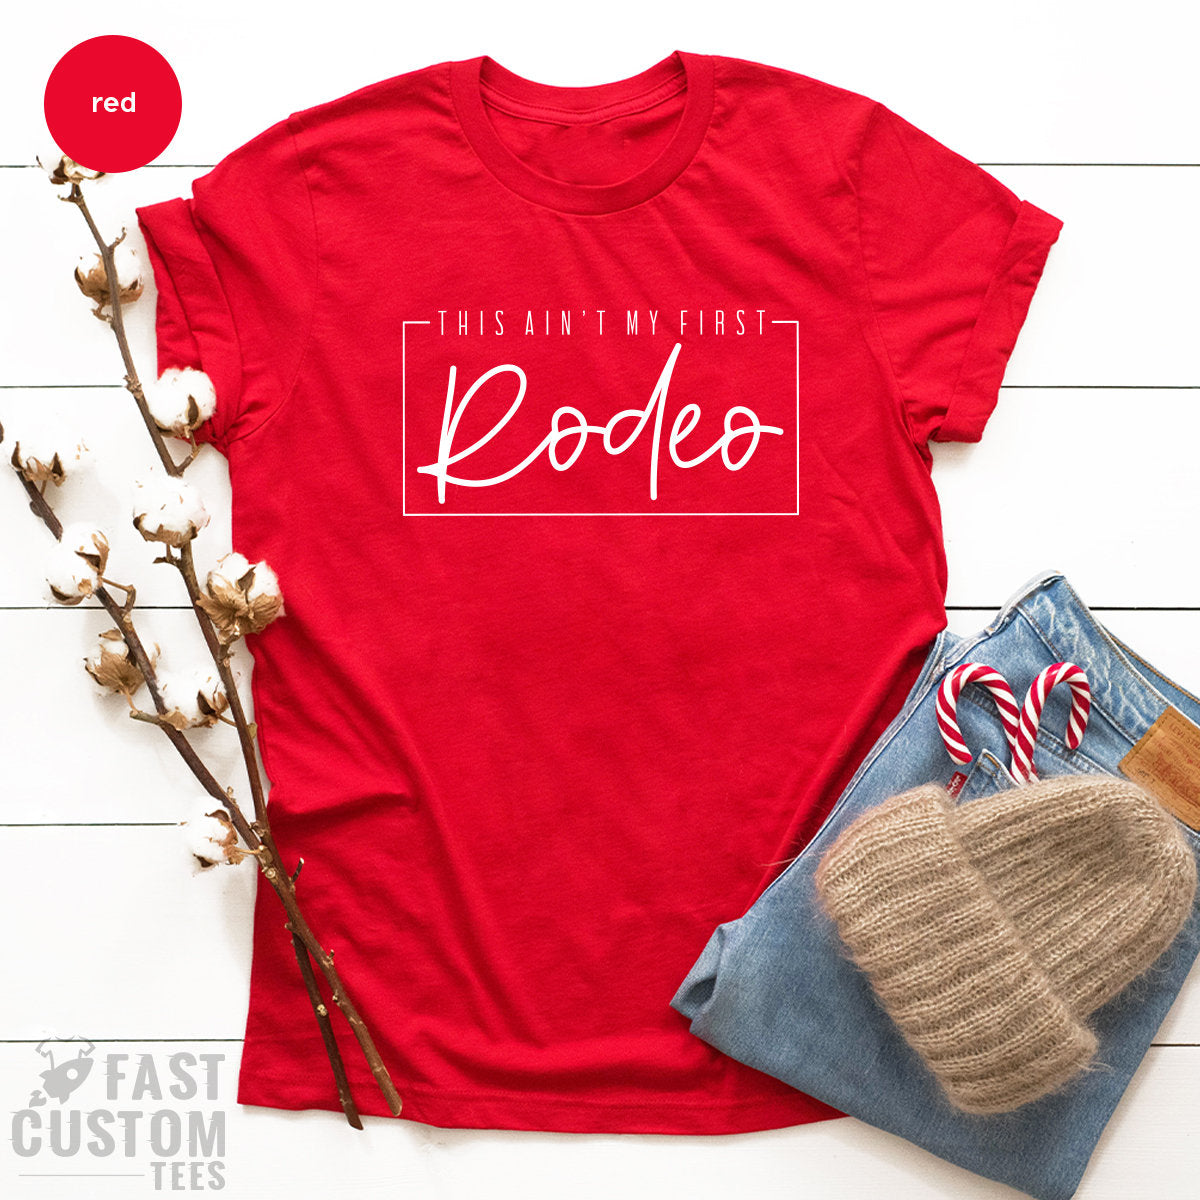 Country Shirt, Rodeo Graphic Tee, This Ain't My First Rodeo Tee, Country TShirt, Southern T Shirt, Western T-Shirt, Cowgirl Shirts - Fastdeliverytees.com